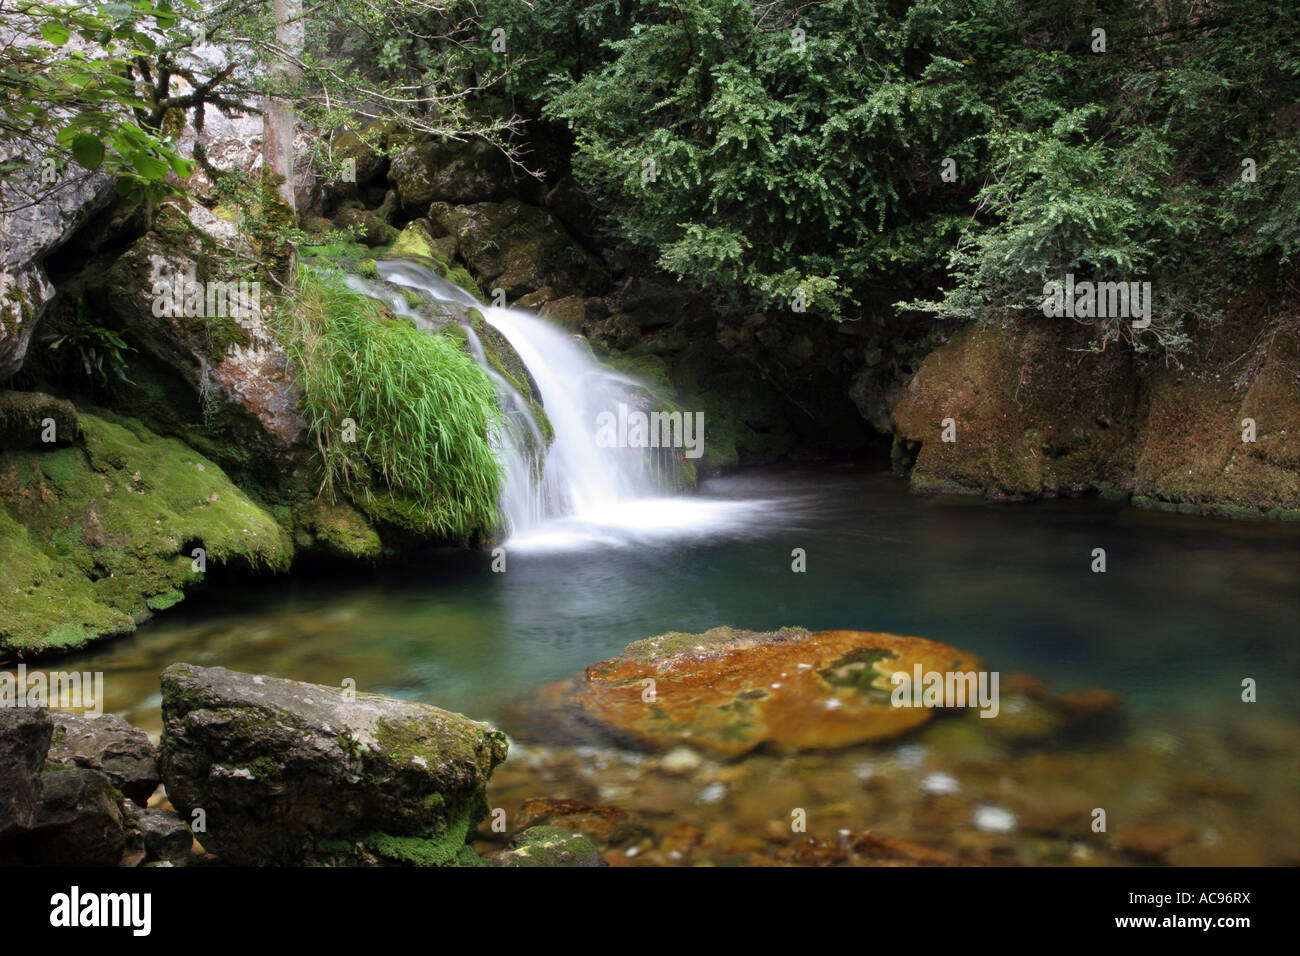 Cascade Flowing from the Grotte de Choranche Vercors Regional Natural Park France Stock Photo